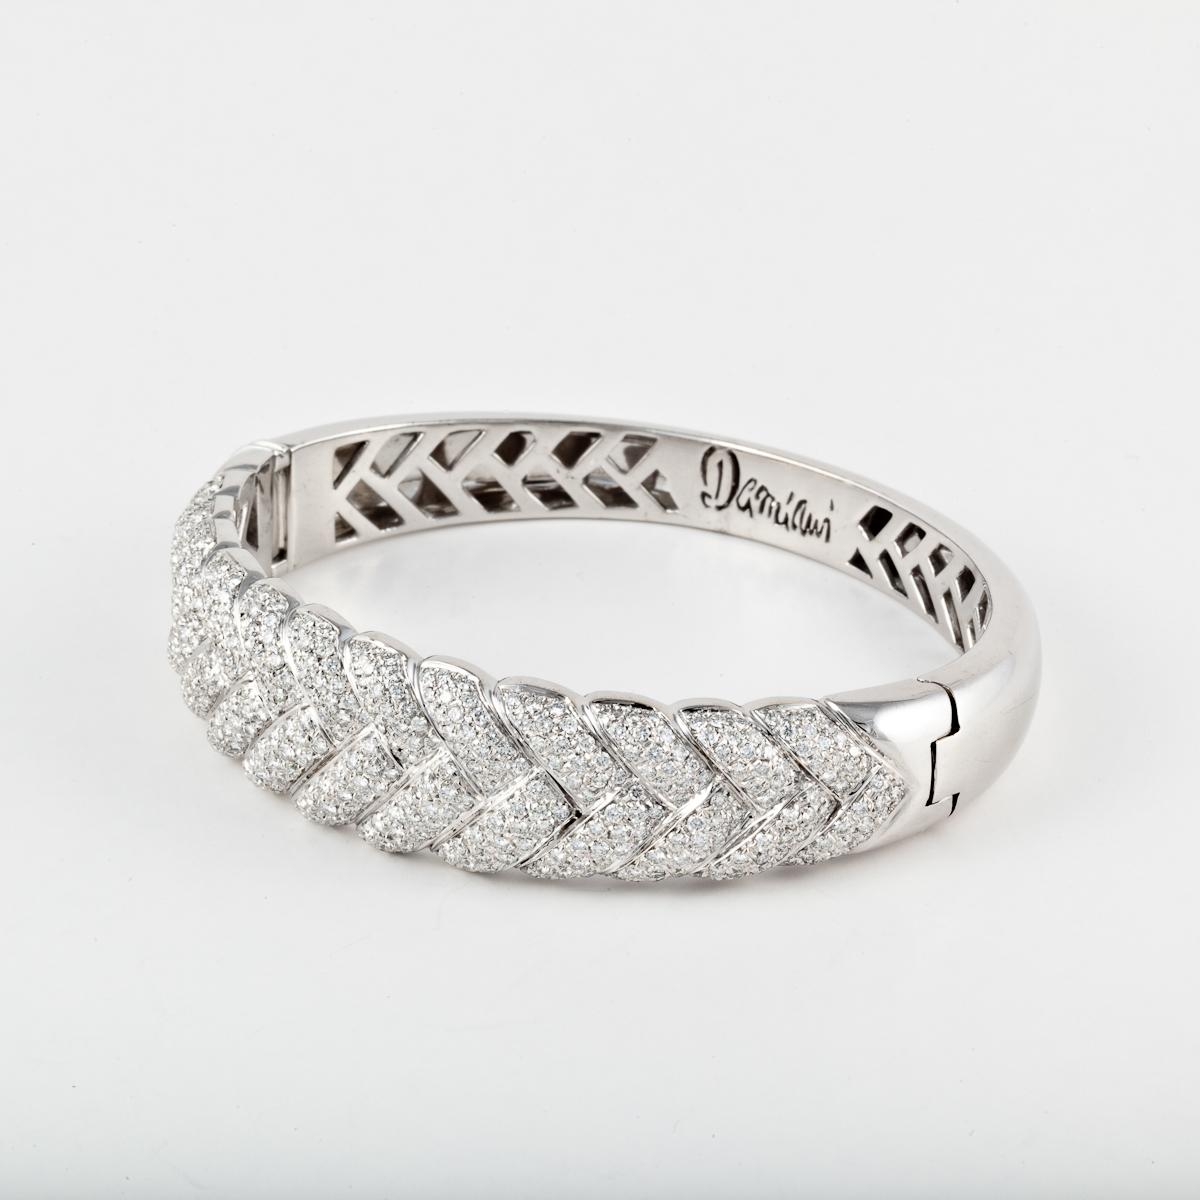 Damiani hinged bangle bracelet in 18K white gold with pavé round diamonds.  The bracelet is marked 